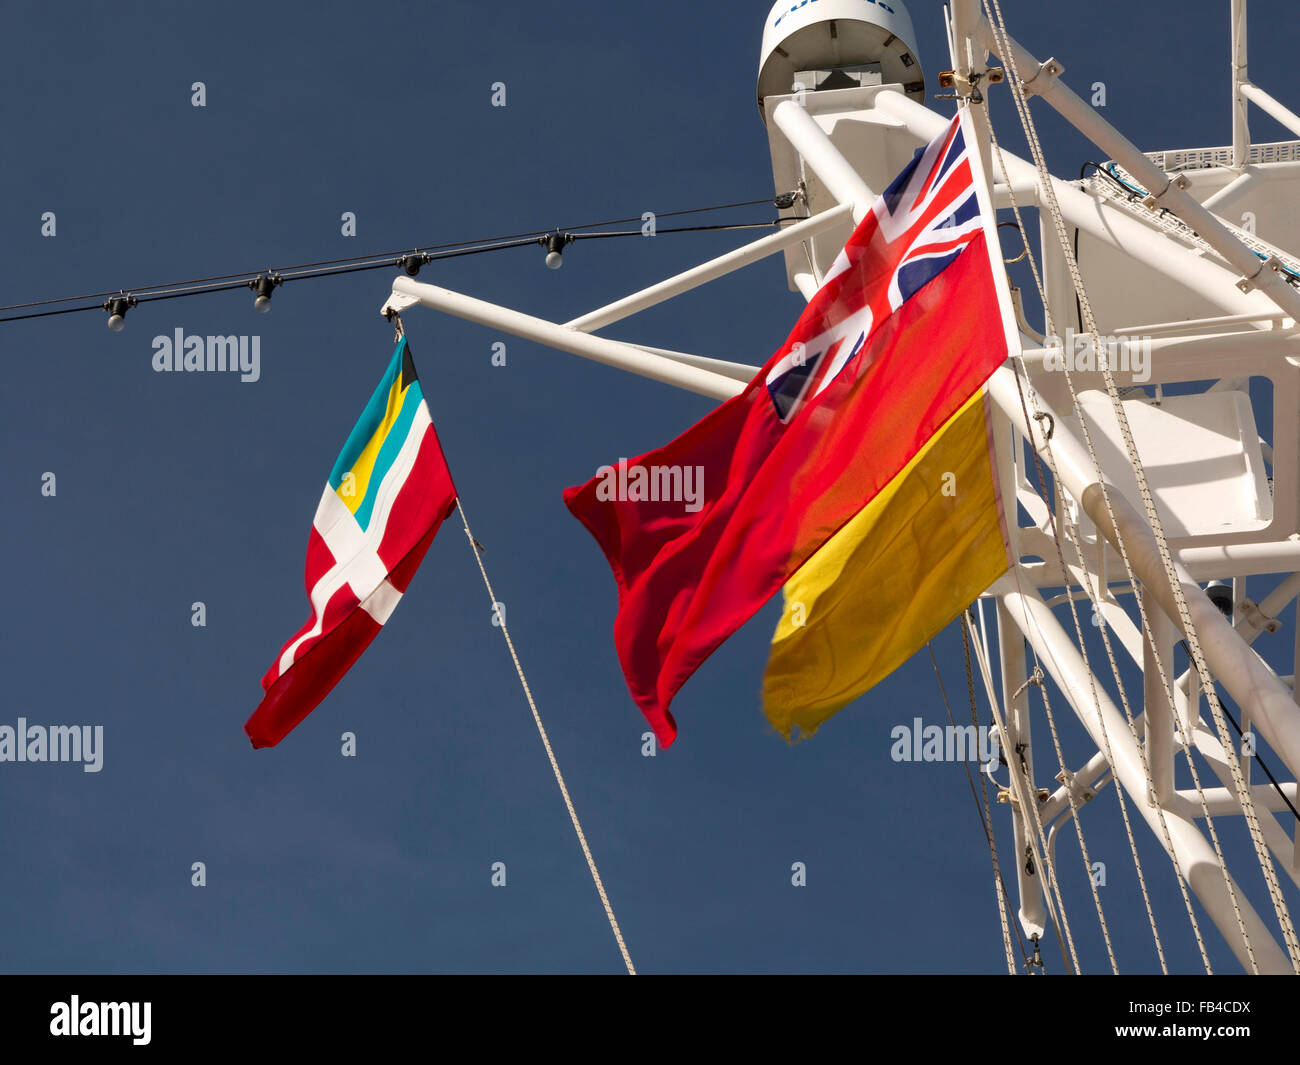 Ms Hanseatic flying yellow quarantine flag, UK red and Bahamas ensigns and Hapag Lloyd flags Stock Photo